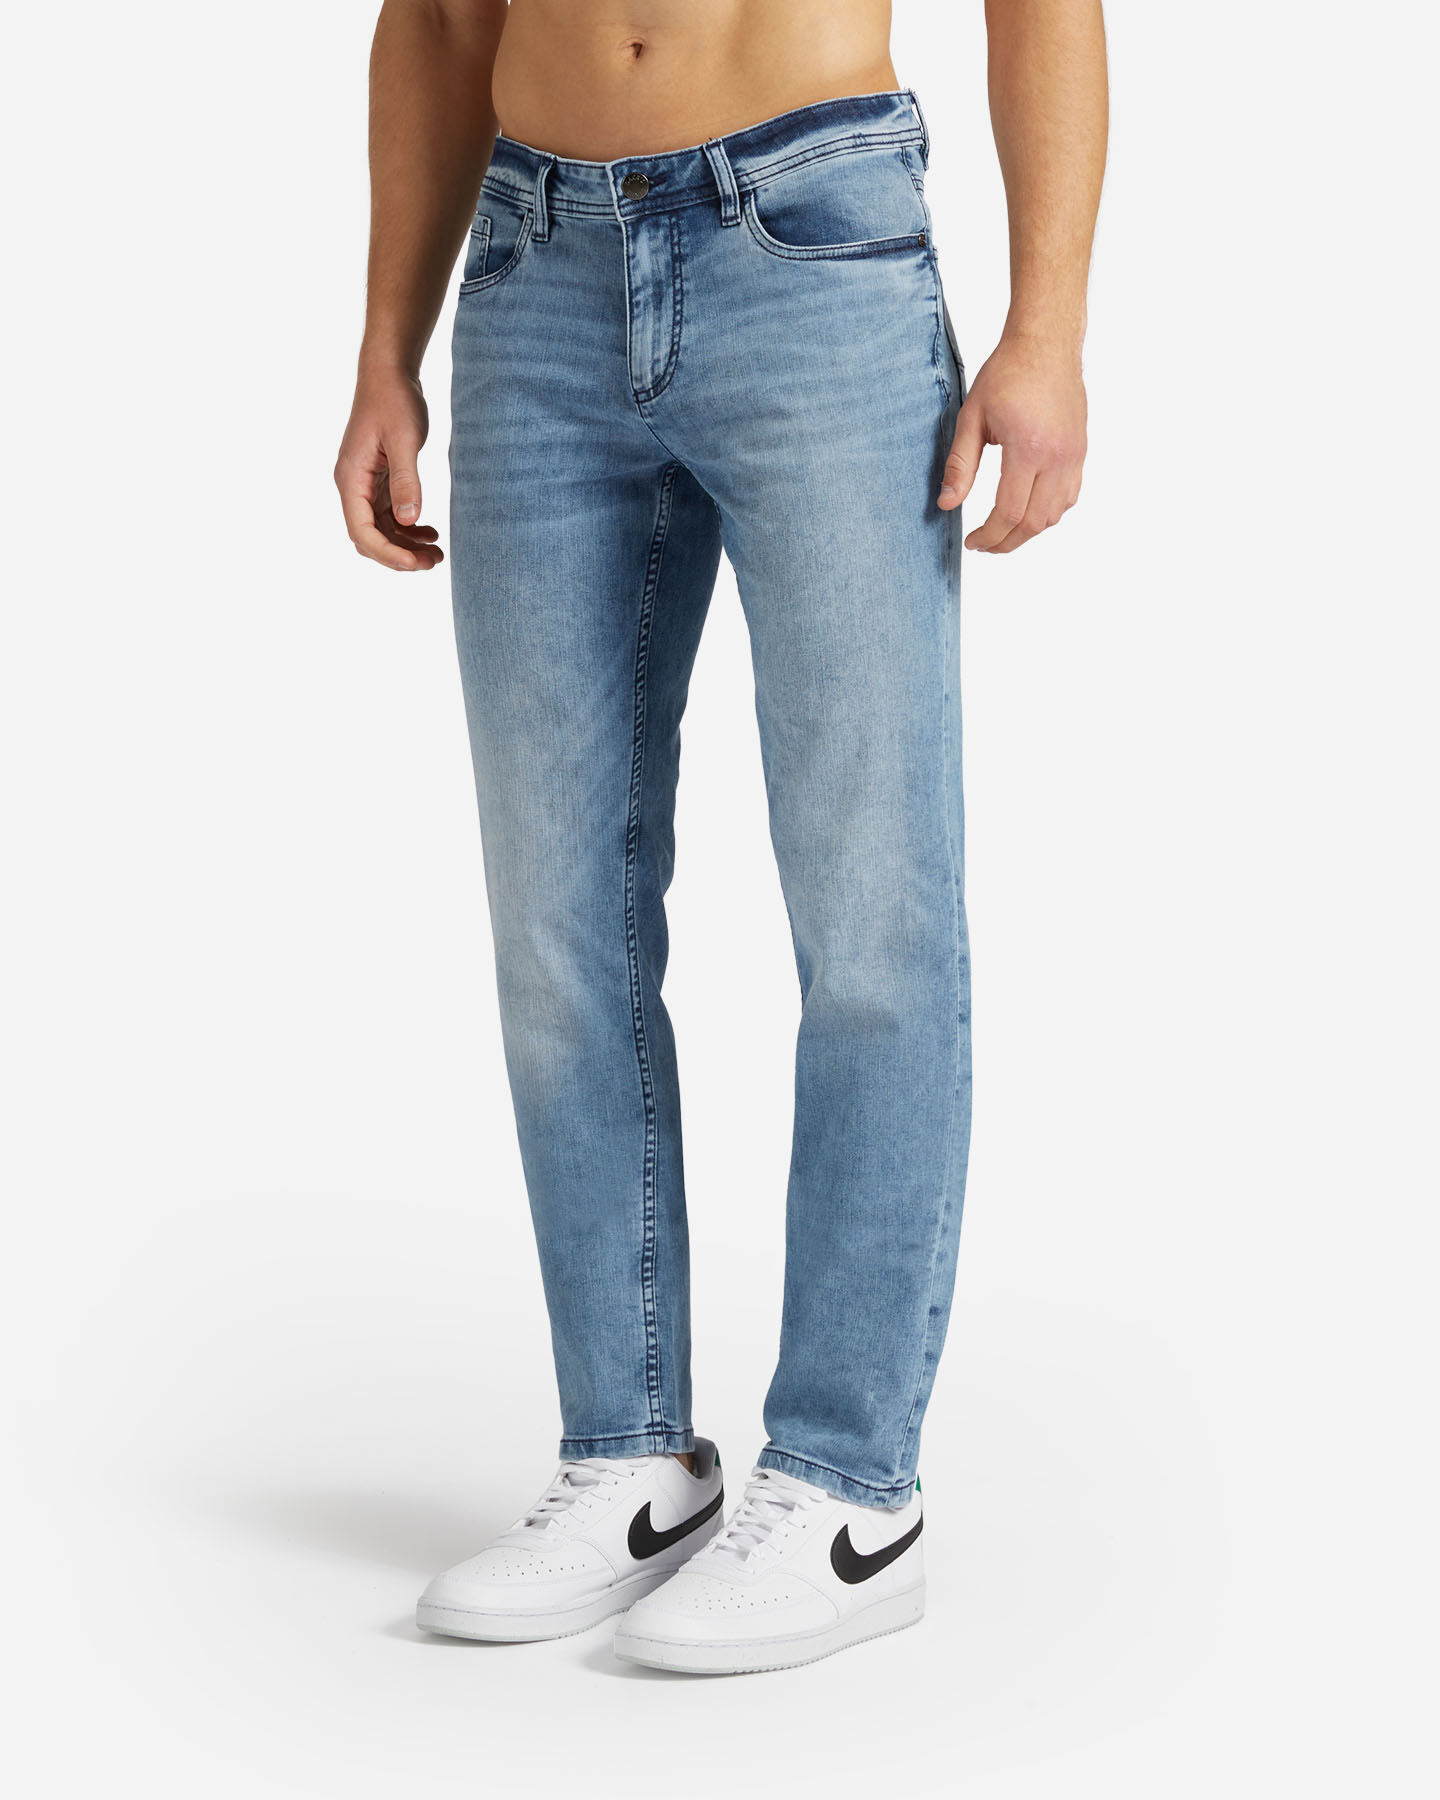  Jeans DACK'S ESSENTIAL M S4129650|LD|44 scatto 2